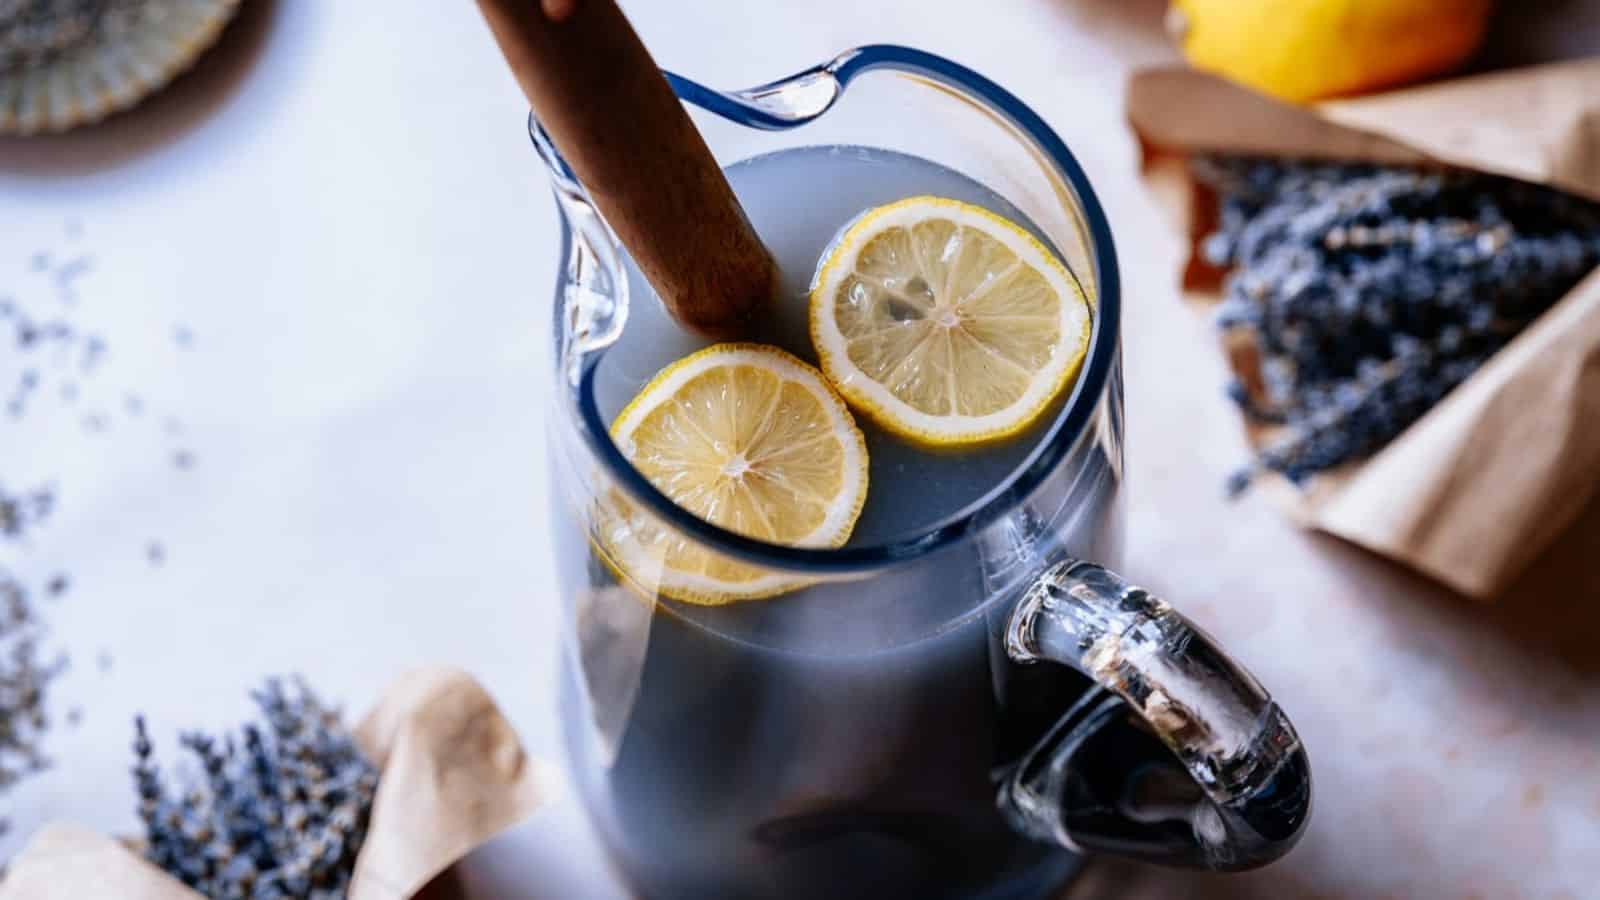 A refreshing and soothing lavender lemonade.